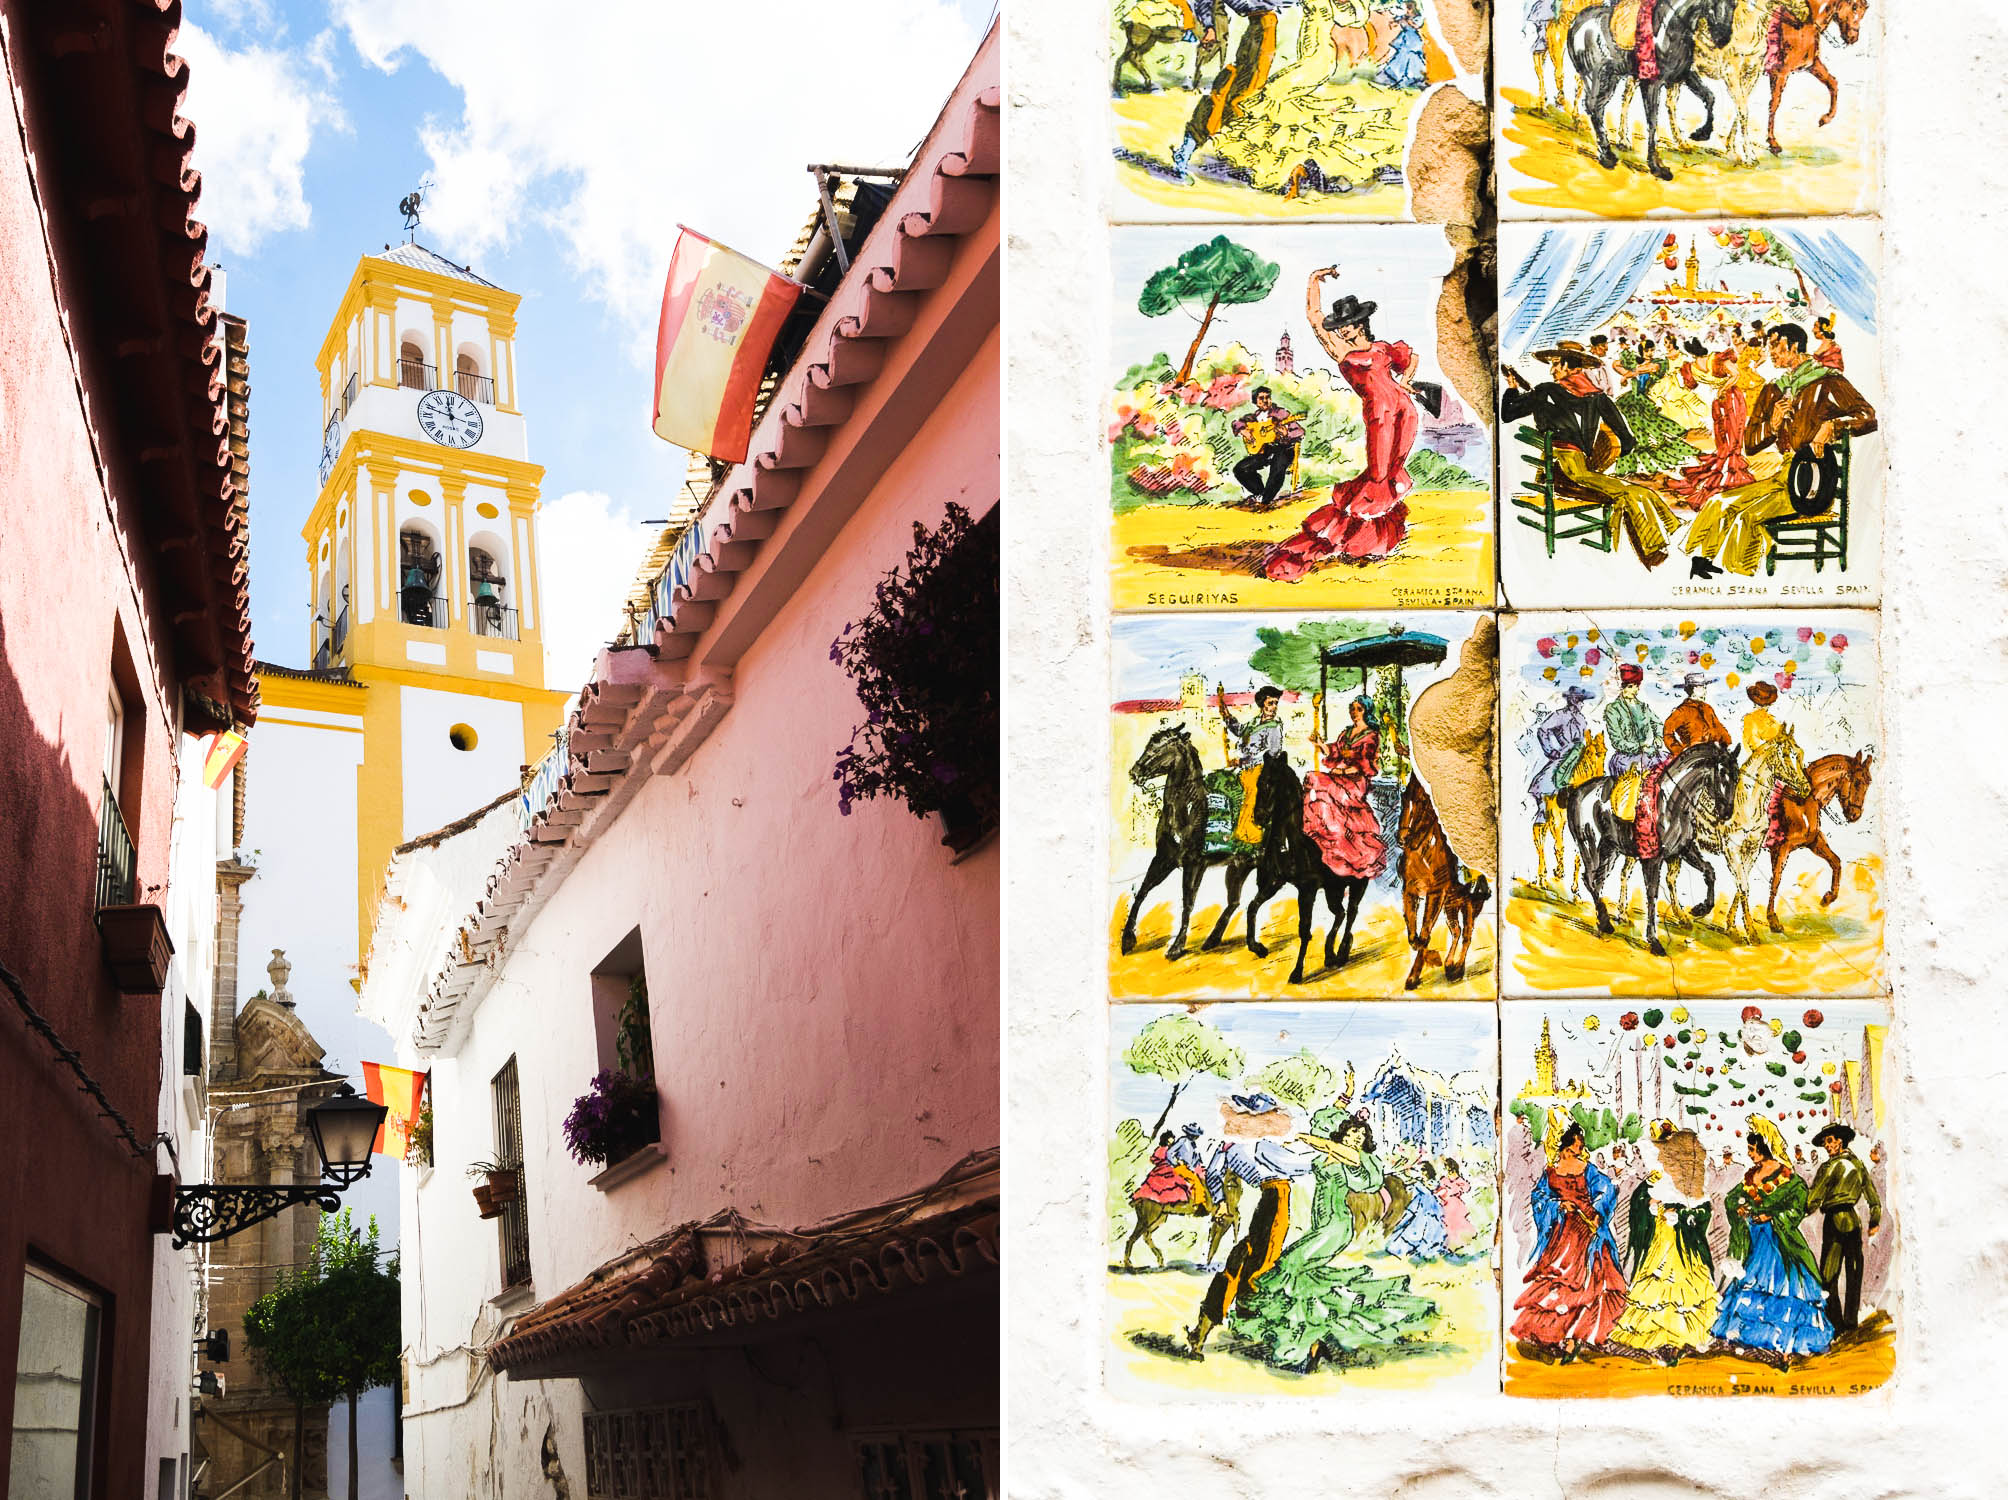 A tour of the charming old town of Marbella in Andalusia, Southern Spain